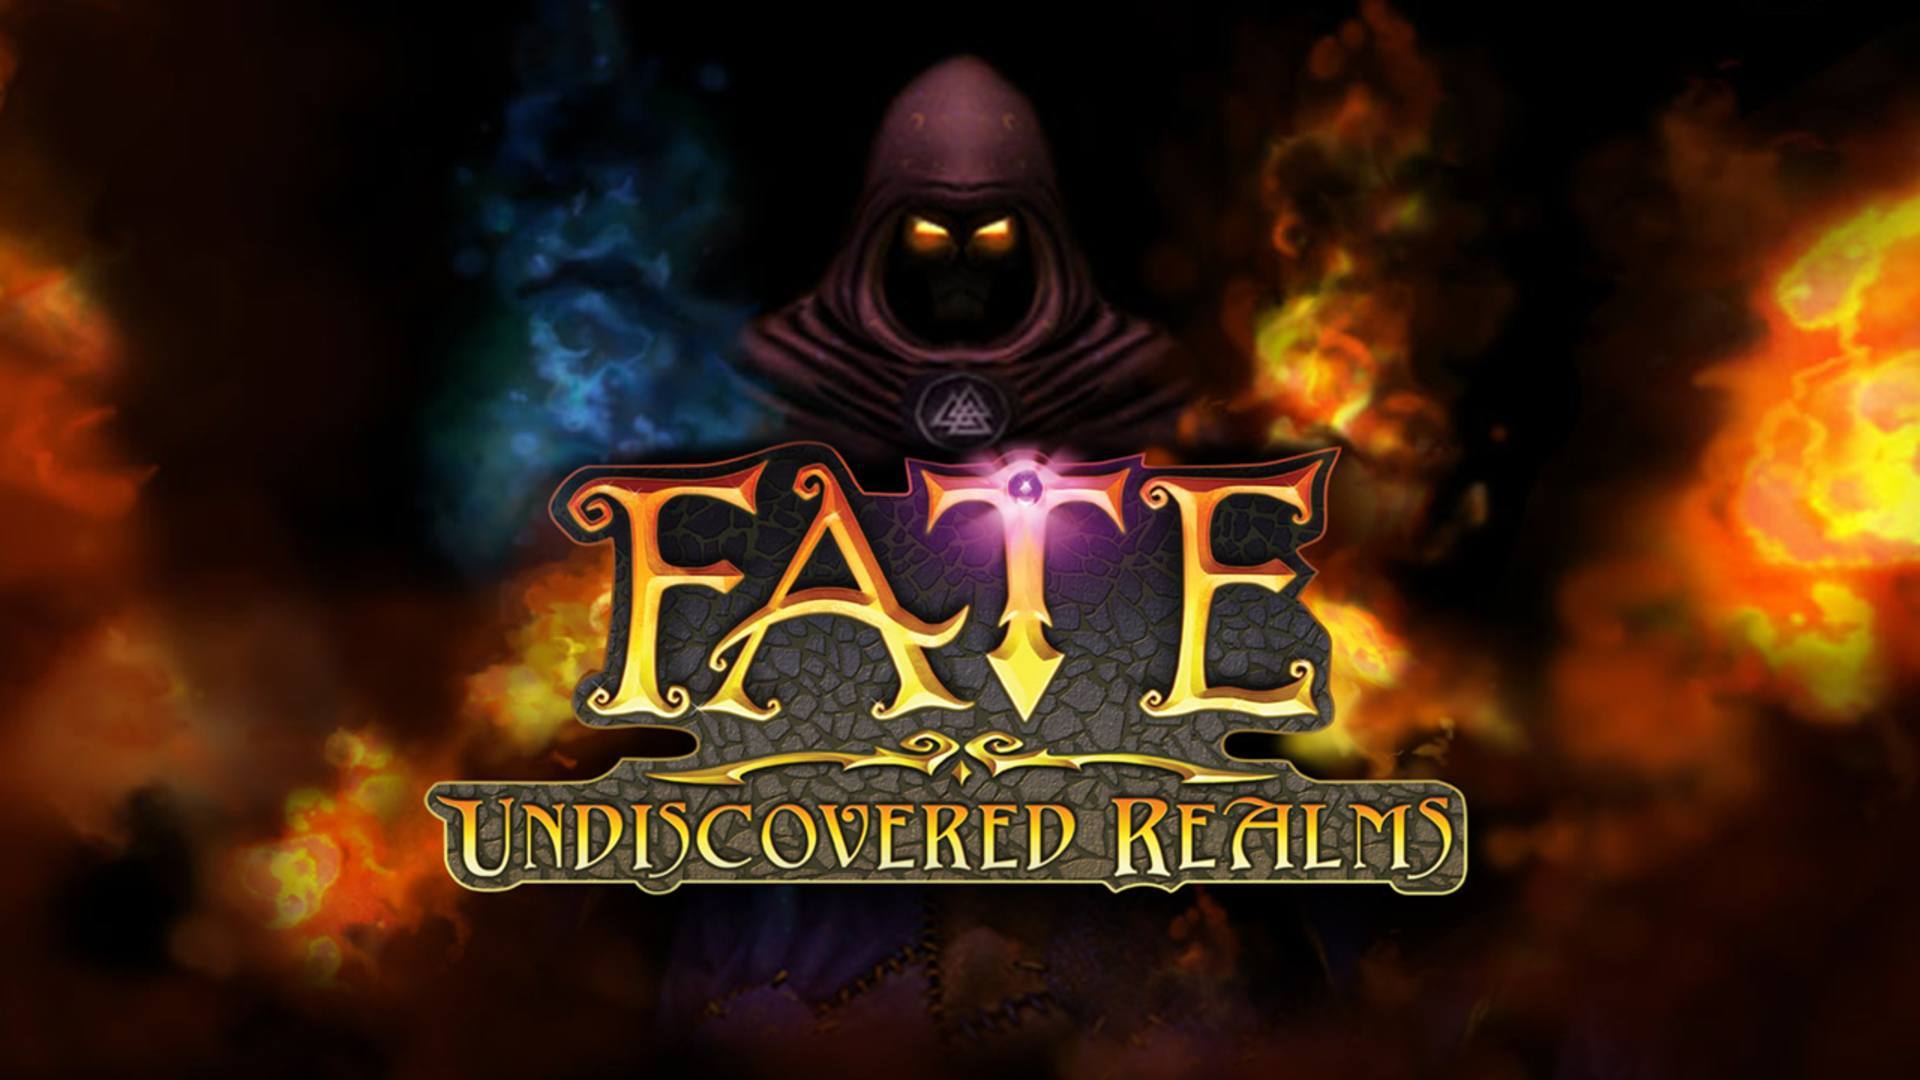 what is the unlock code for fate undiscovered realms